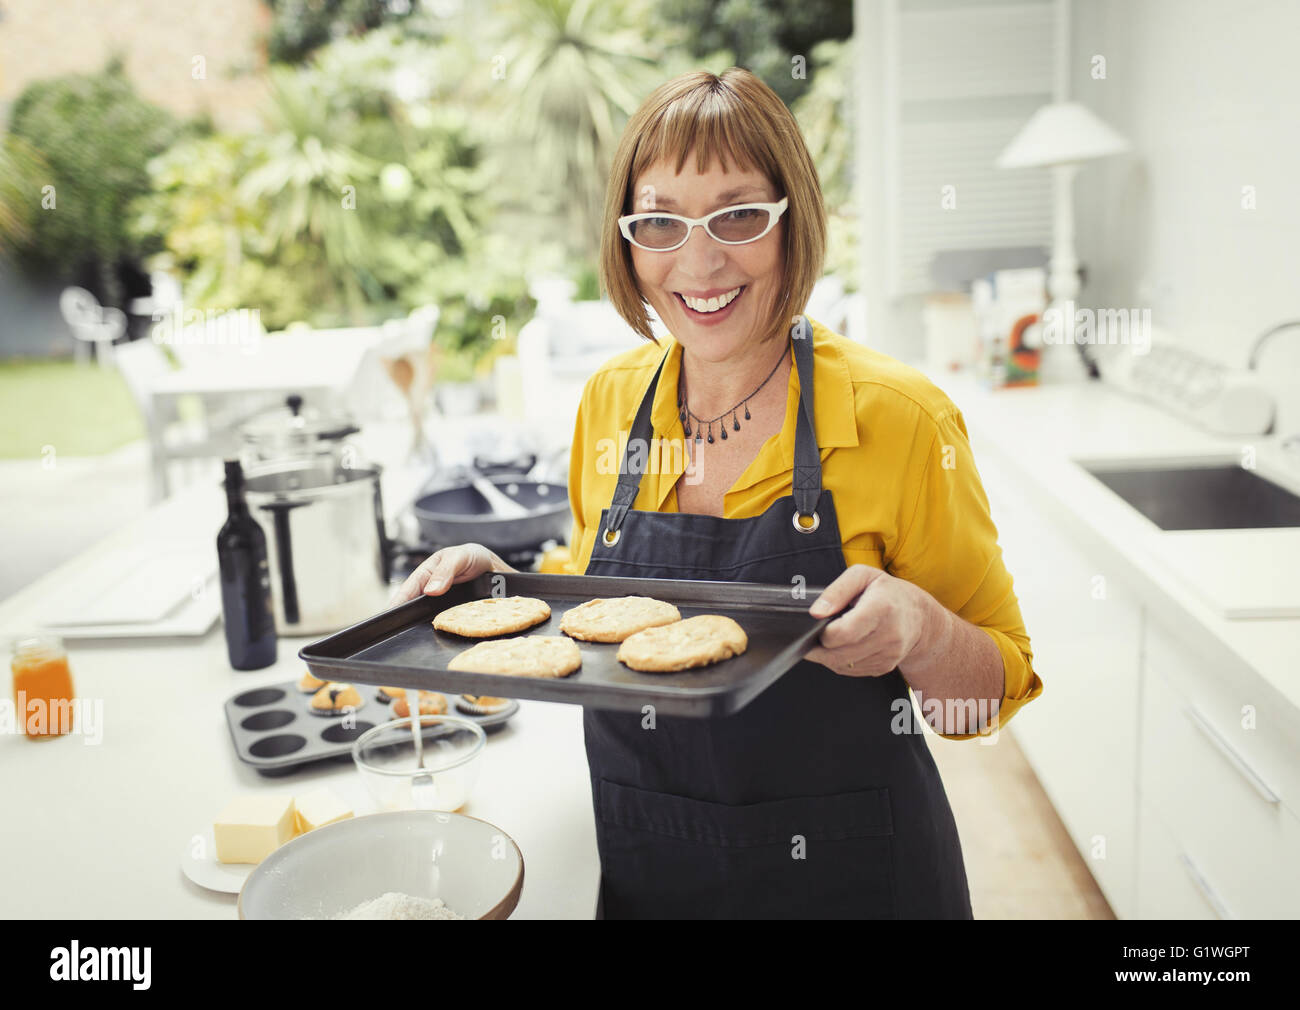 Portrait smiling mature woman baking cookies in kitchen Stock Photo